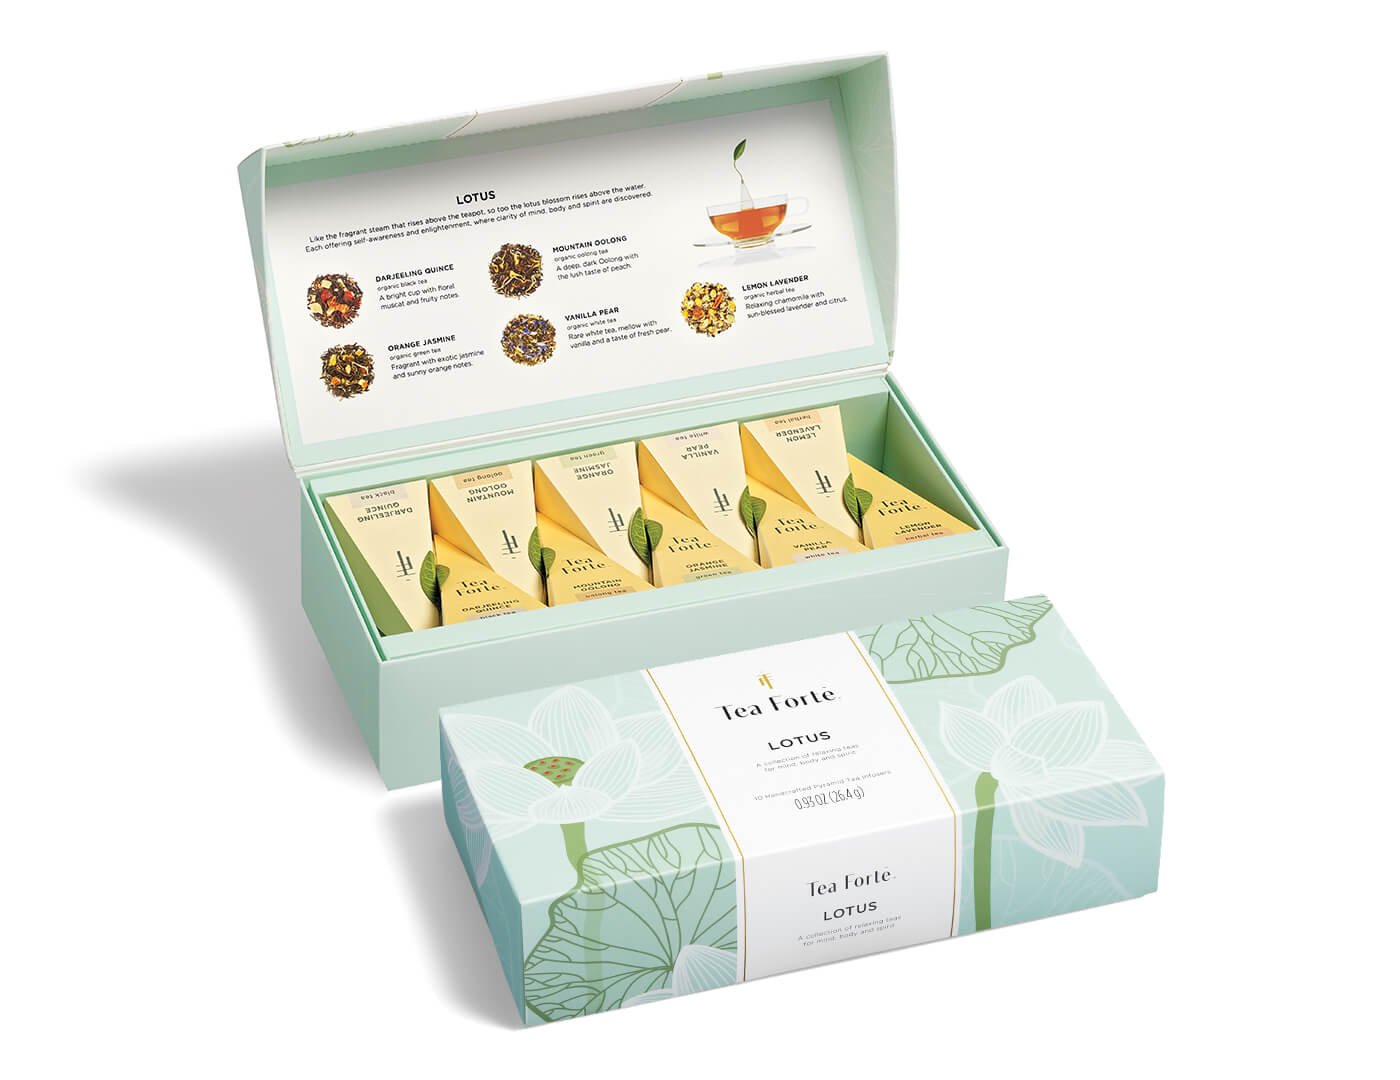 Lotus tea assortment in a 10 count petite presentation box with lid open and closed